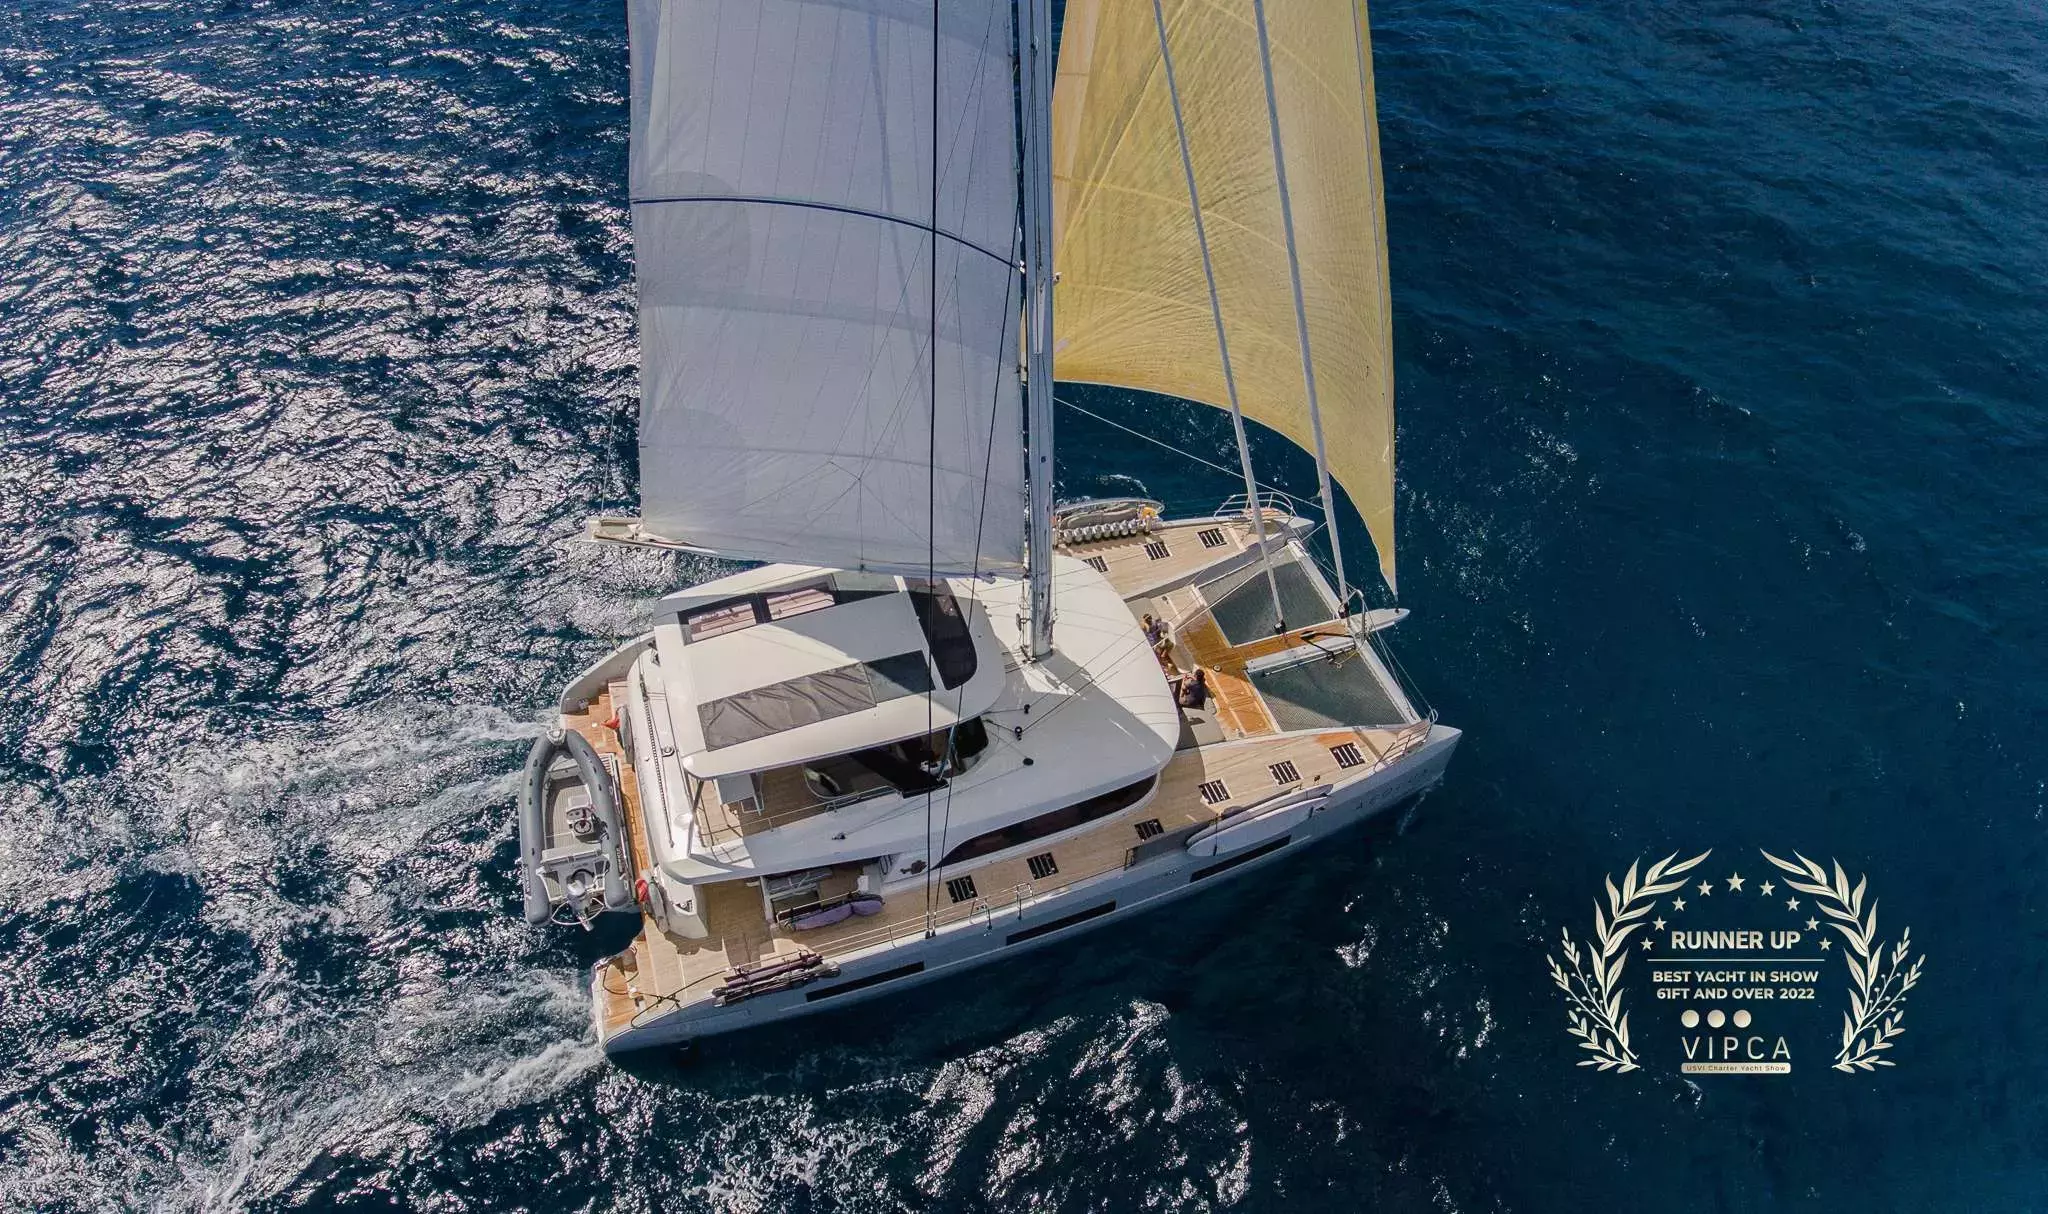 Aeolus by Lagoon - Special Offer for a private Luxury Catamaran Charter in St Thomas with a crew